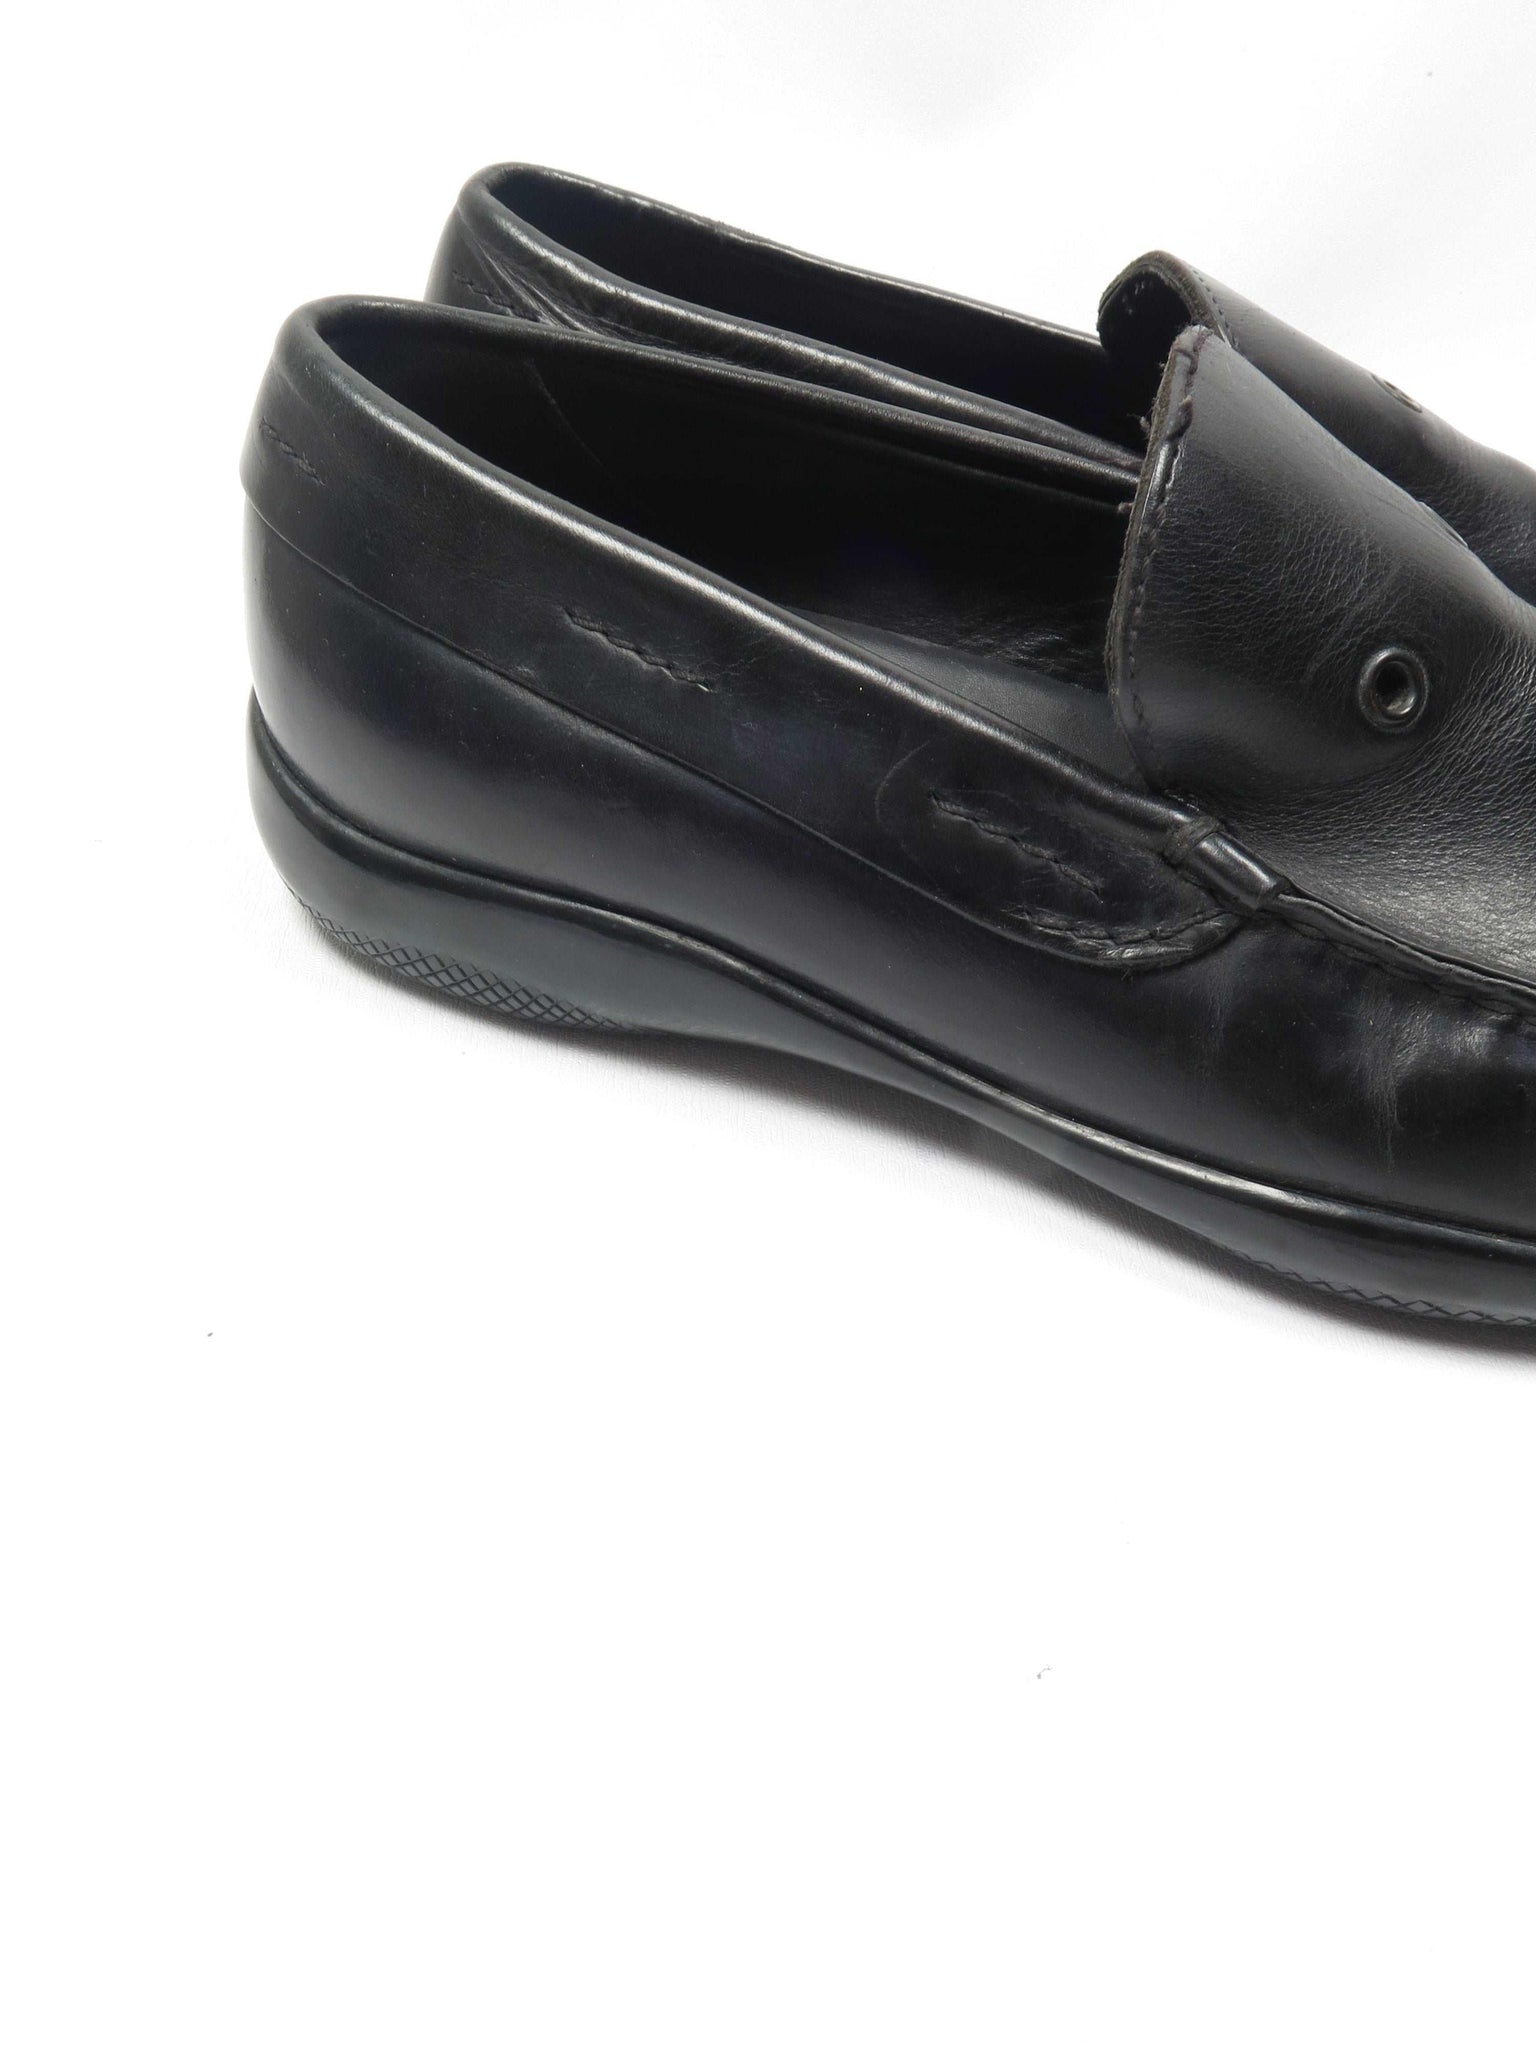 Black Leather Prada Loafers Shoes 9/43 - The Harlequin